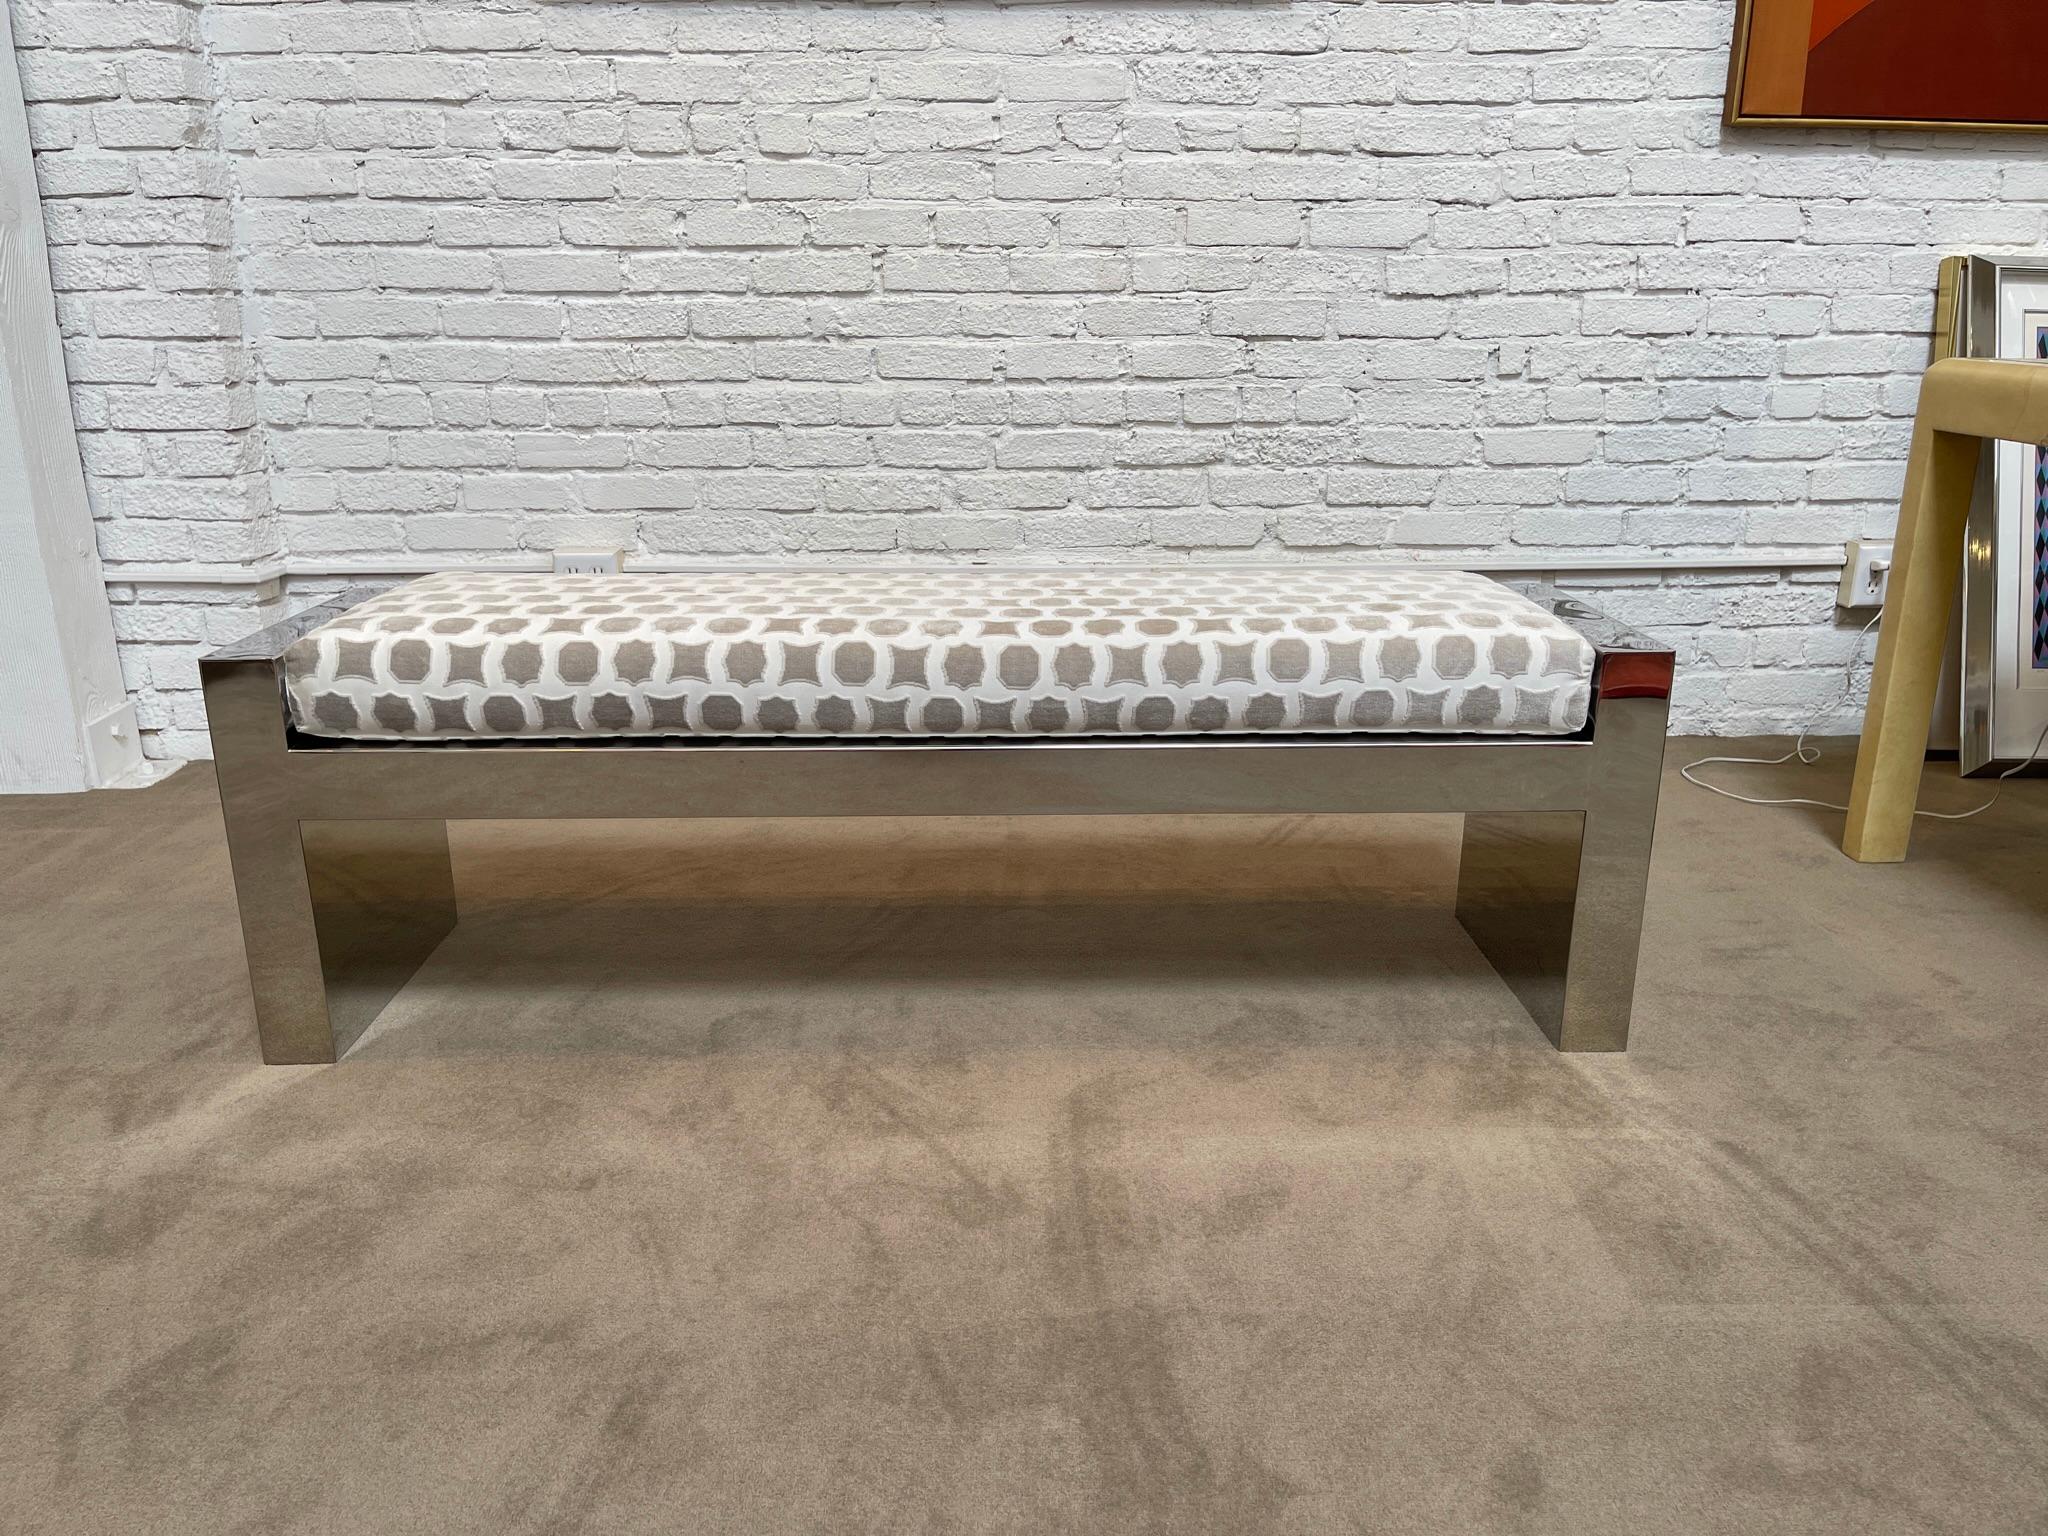 Polished steel upholstered 60 in bench from luxury furniture line. Beautiful condition. Extremely well made. Sturdy, heavy and ready for use. A good look for the foot of the bed or a variety of other places.